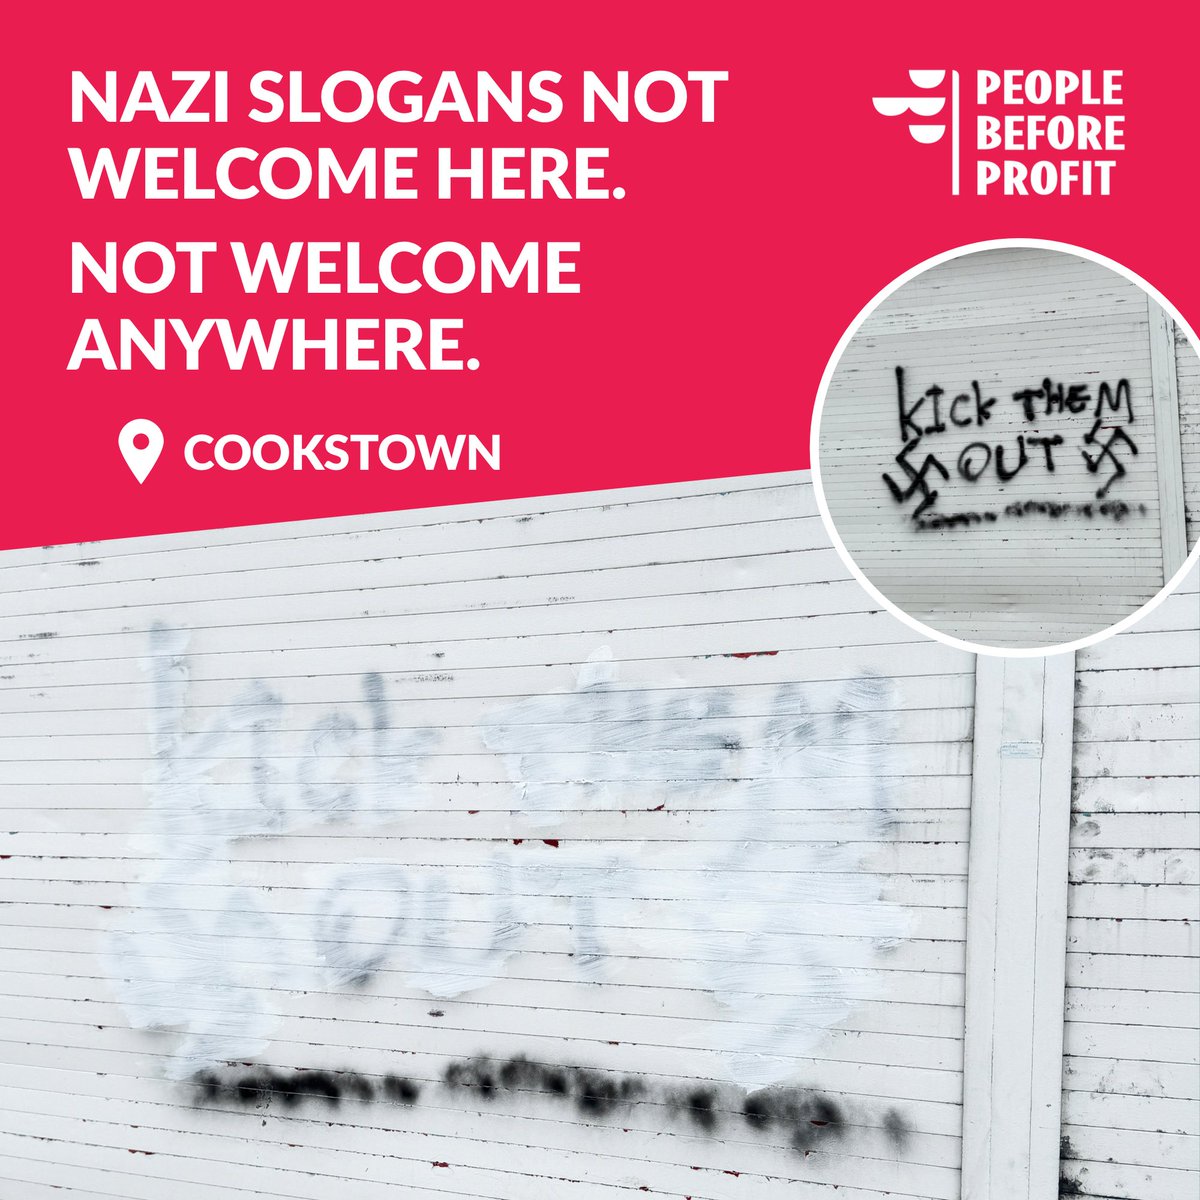 People Before Profit Mid Ulster condemns the despicable Nazi slogans and symbols sprayed in Cookstown. Not here, not anywhere. #NoPasarán